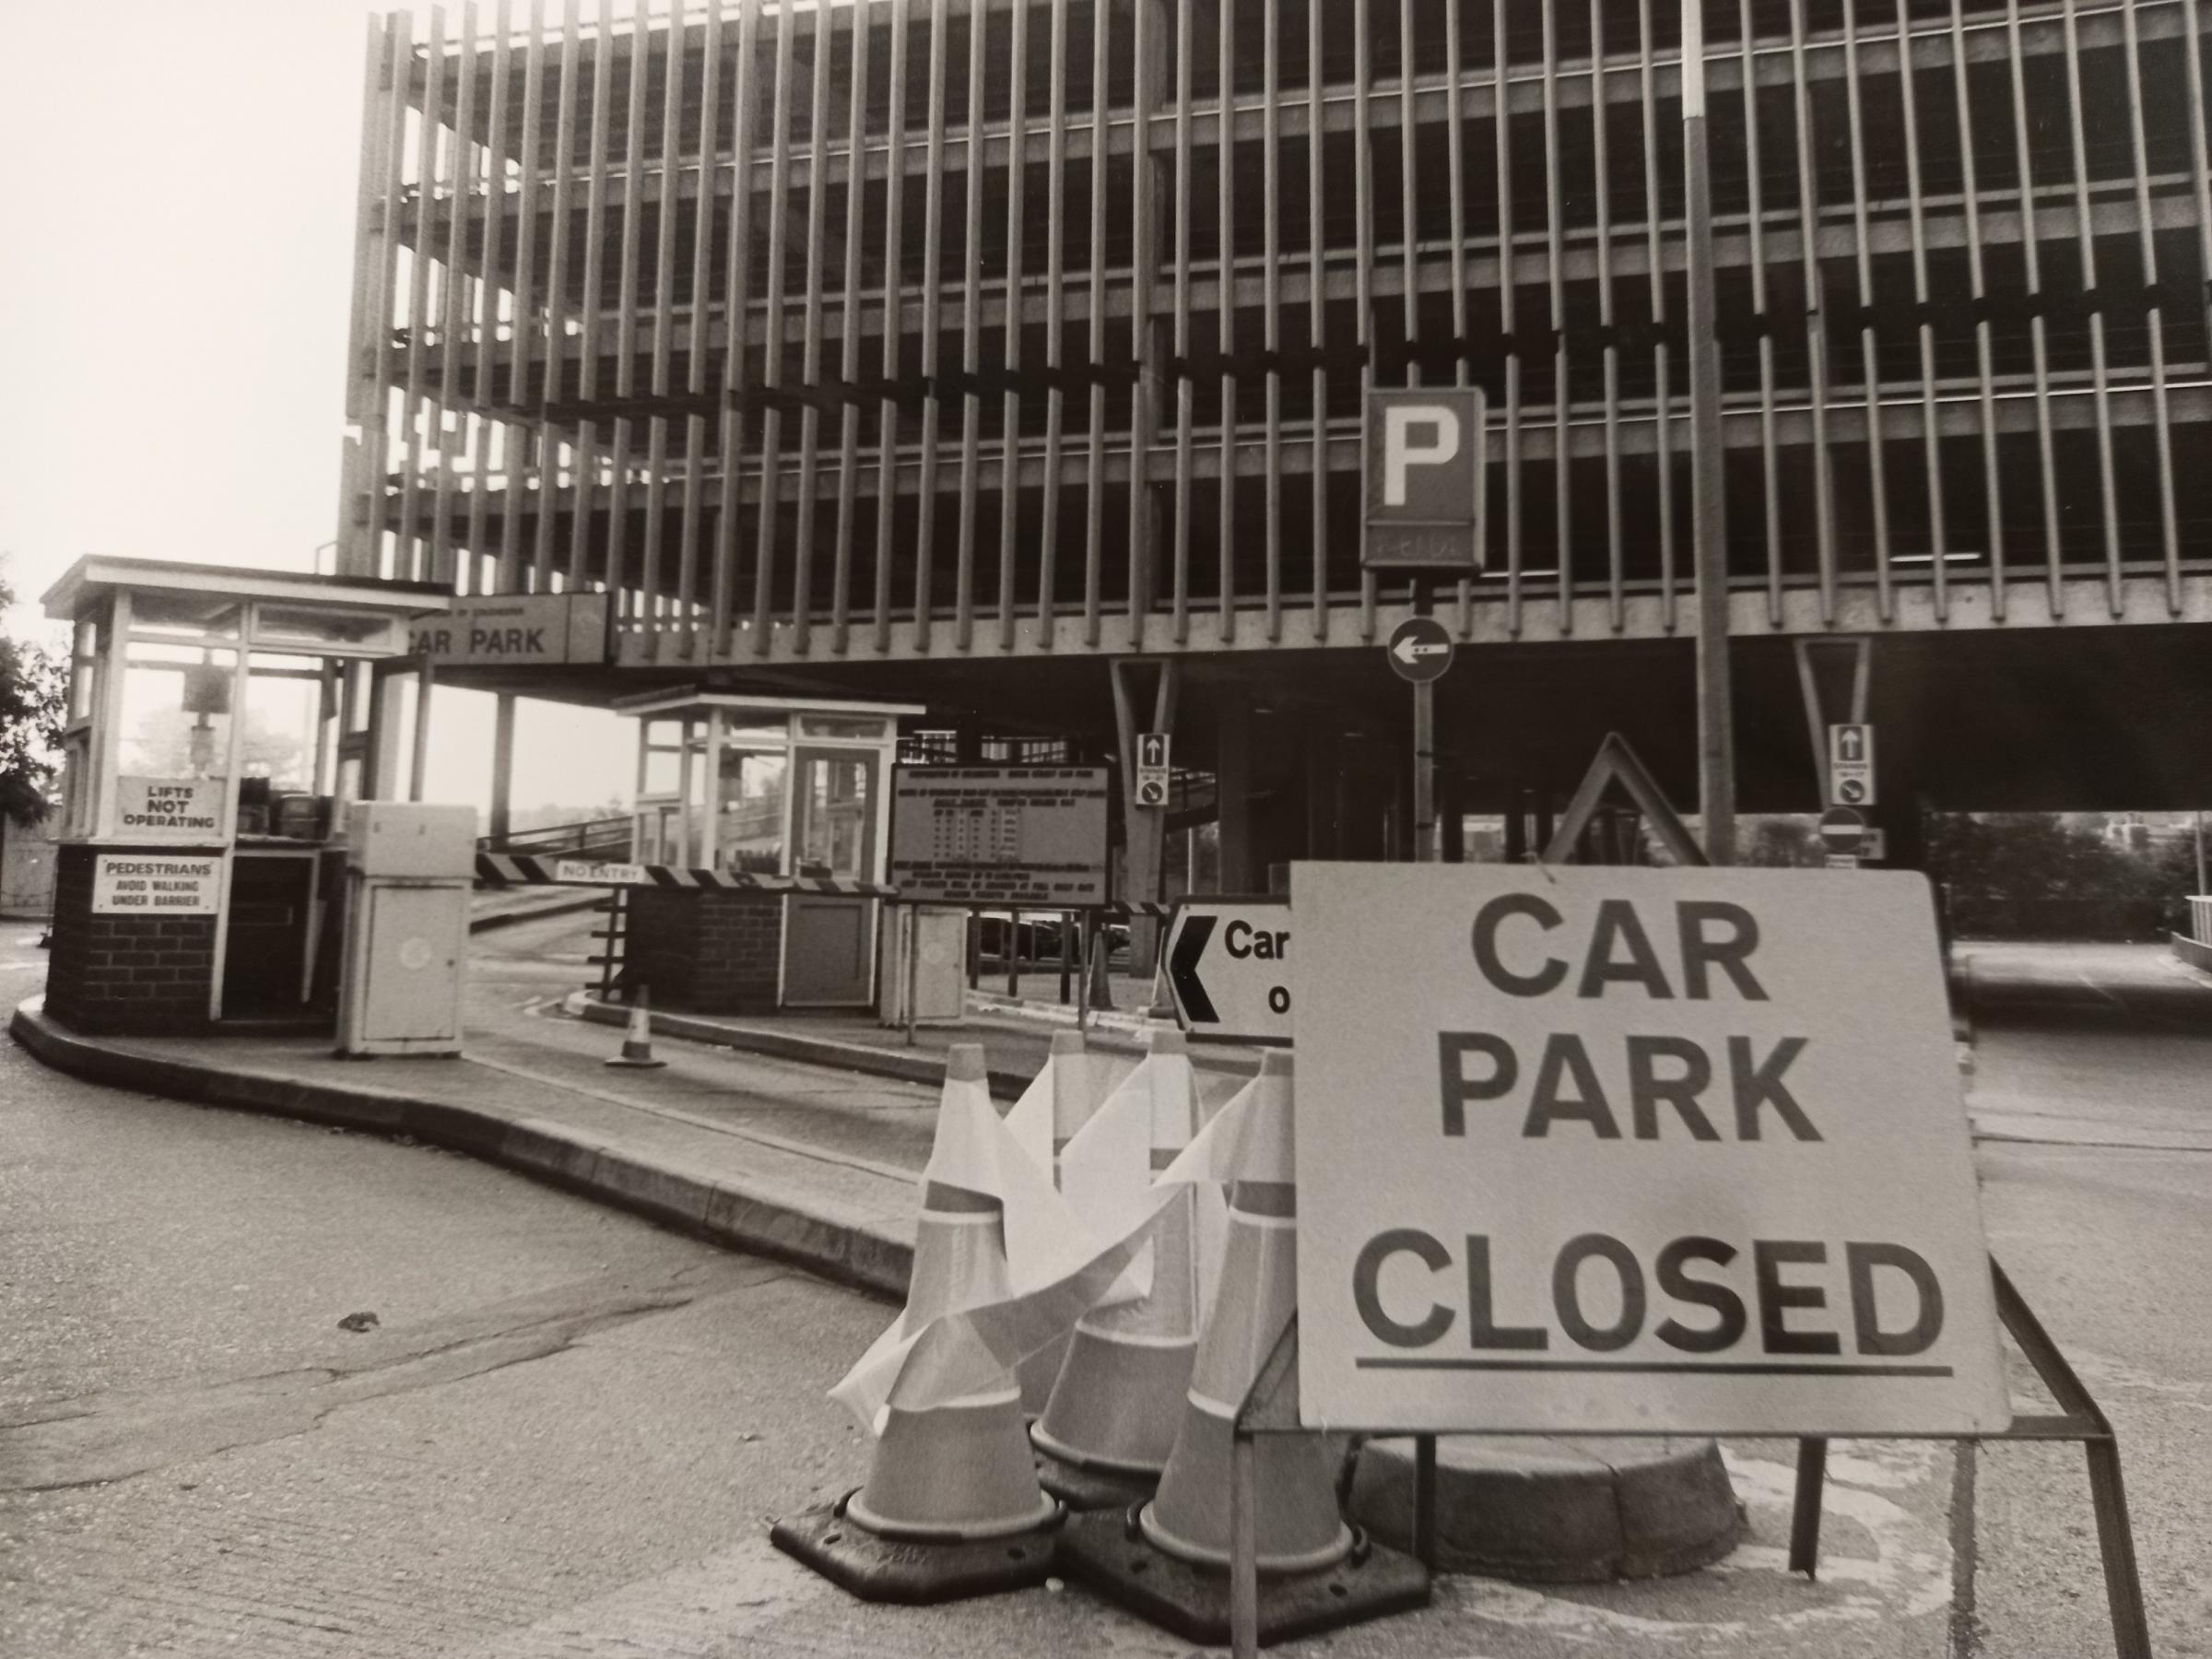 The closed sign for the Queen Street car park back in 1993